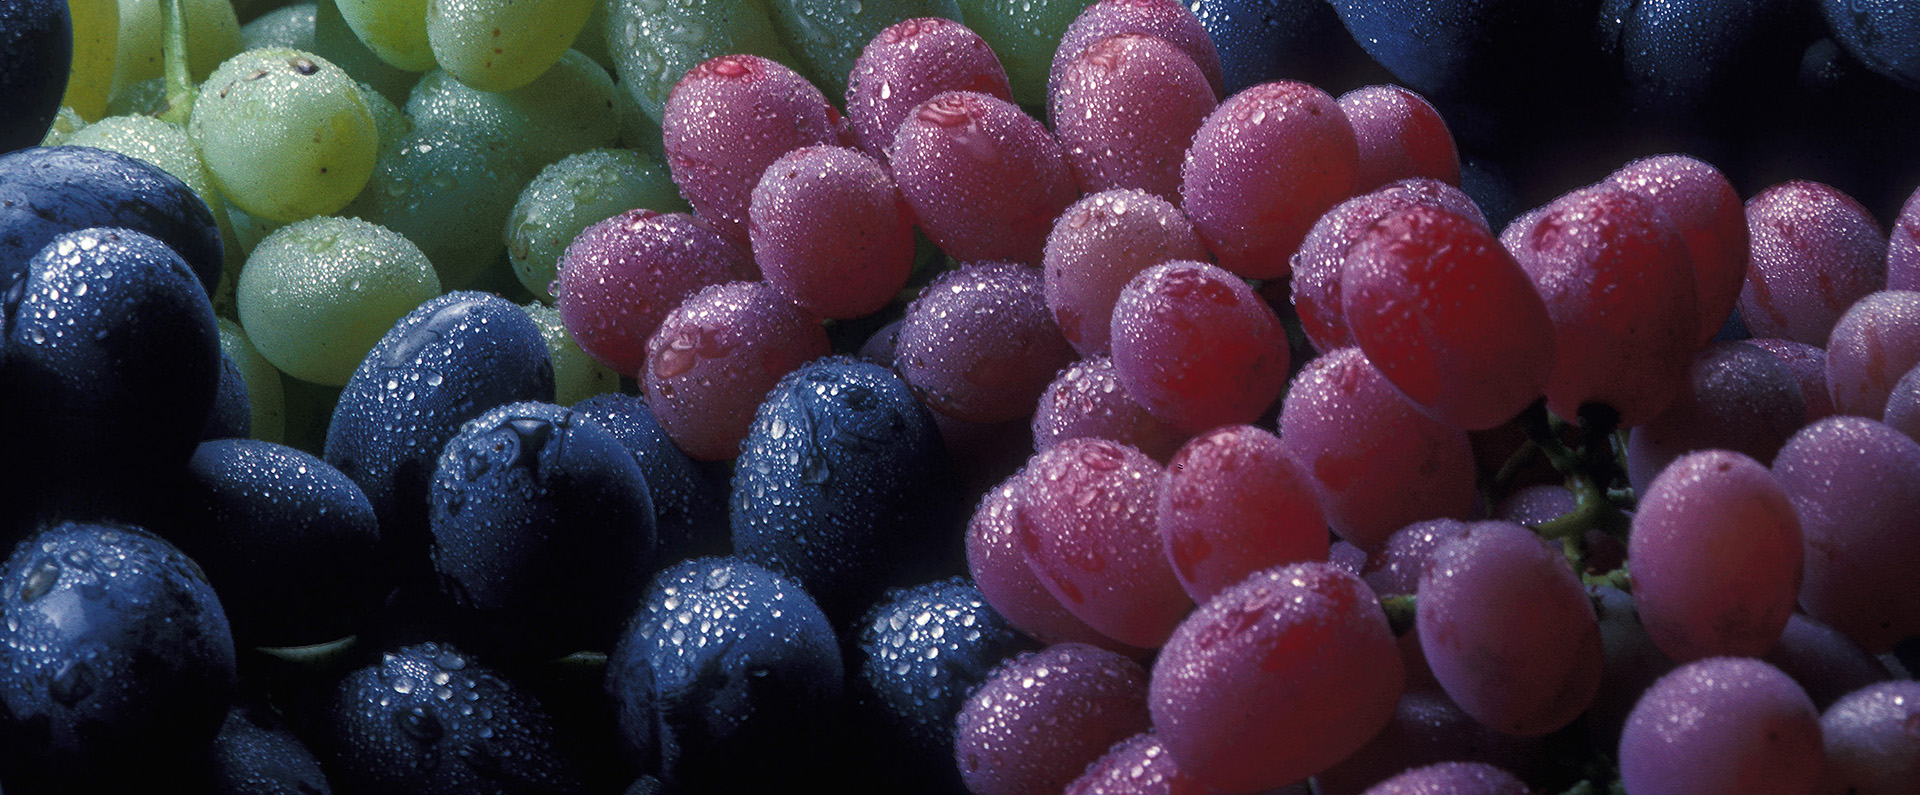 Bunches of black, red and green grapes